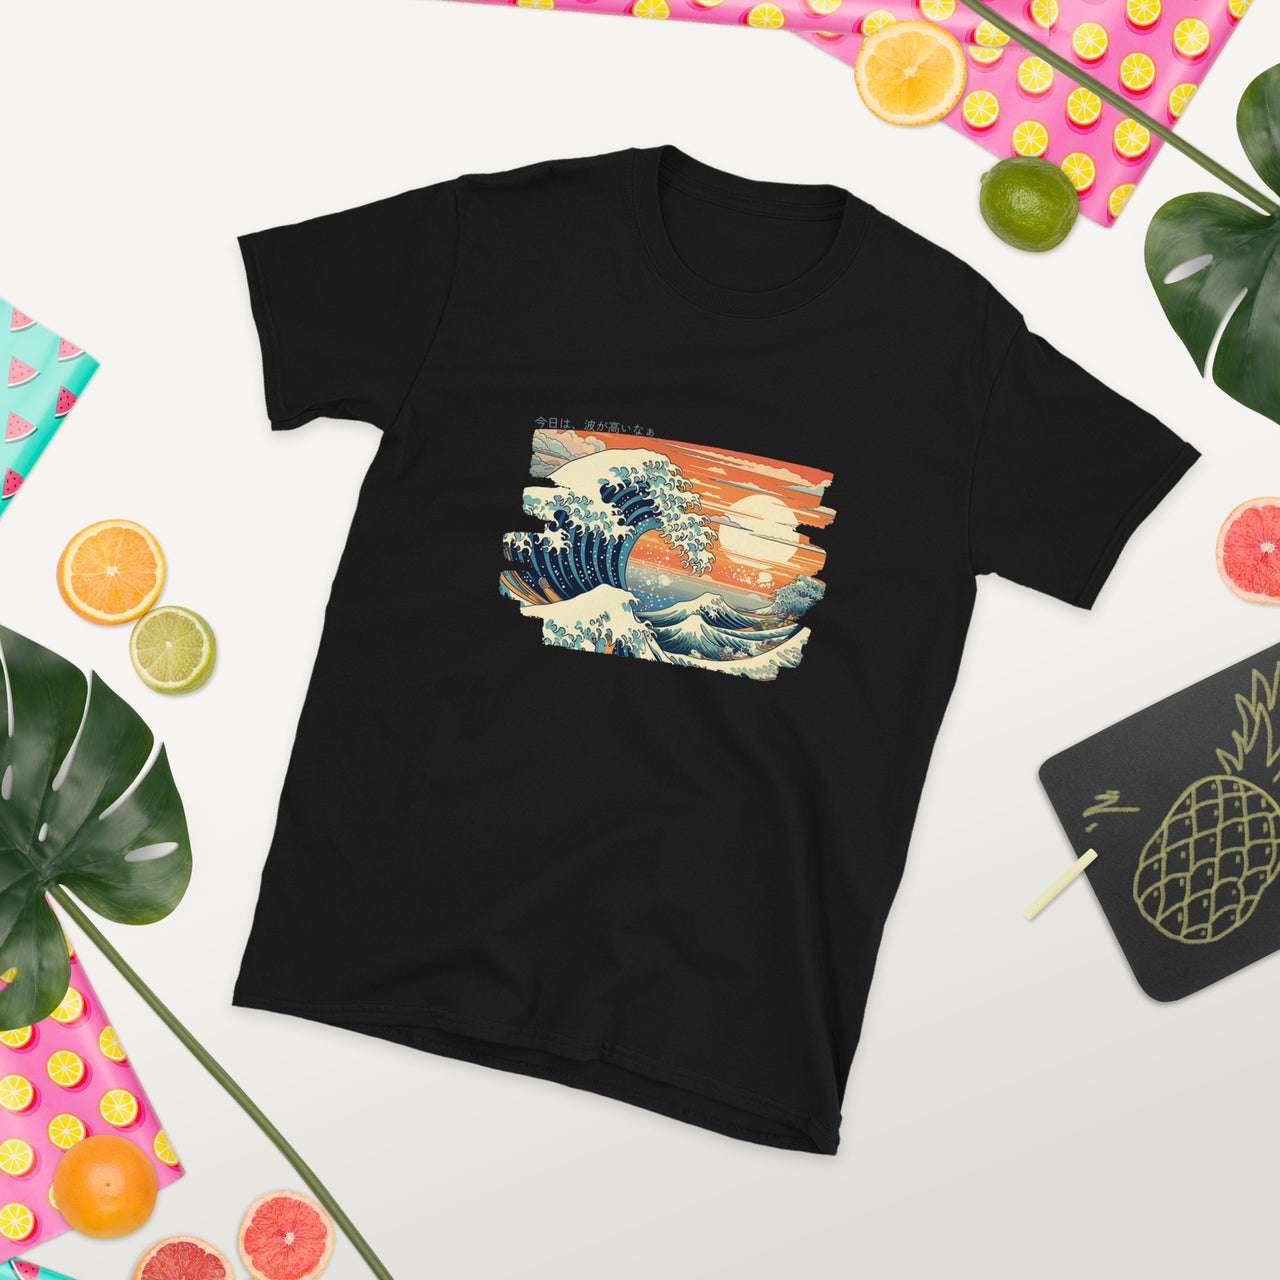 The Waves are High Today Ukiyo-e T-Shirt